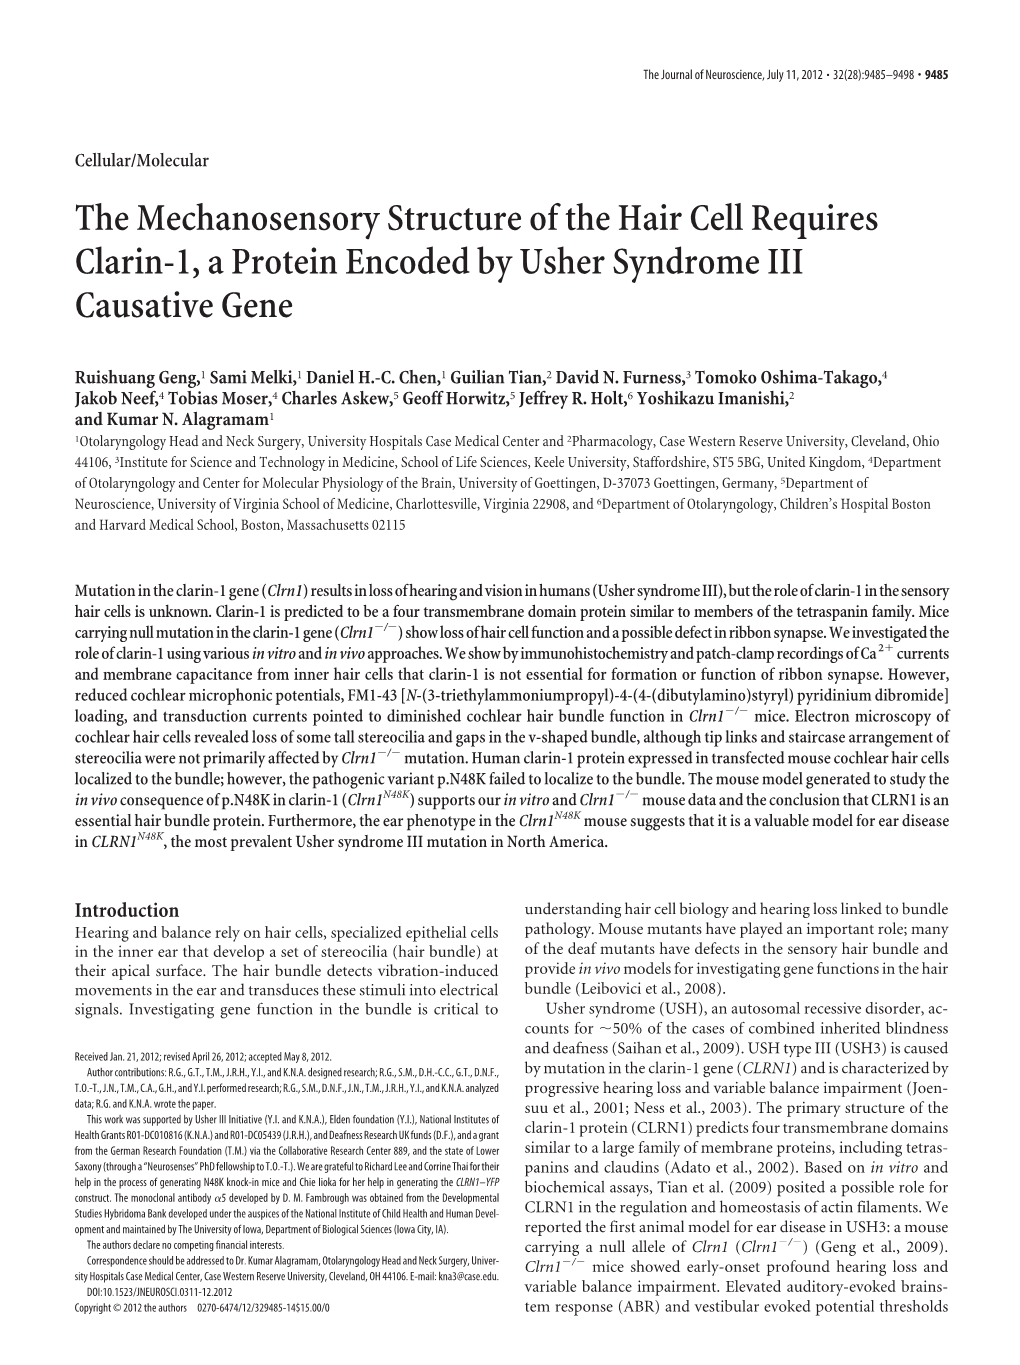 The Mechanosensory Structure of the Hair Cell Requires Clarin-1, a Protein Encoded by Usher Syndrome III Causative Gene